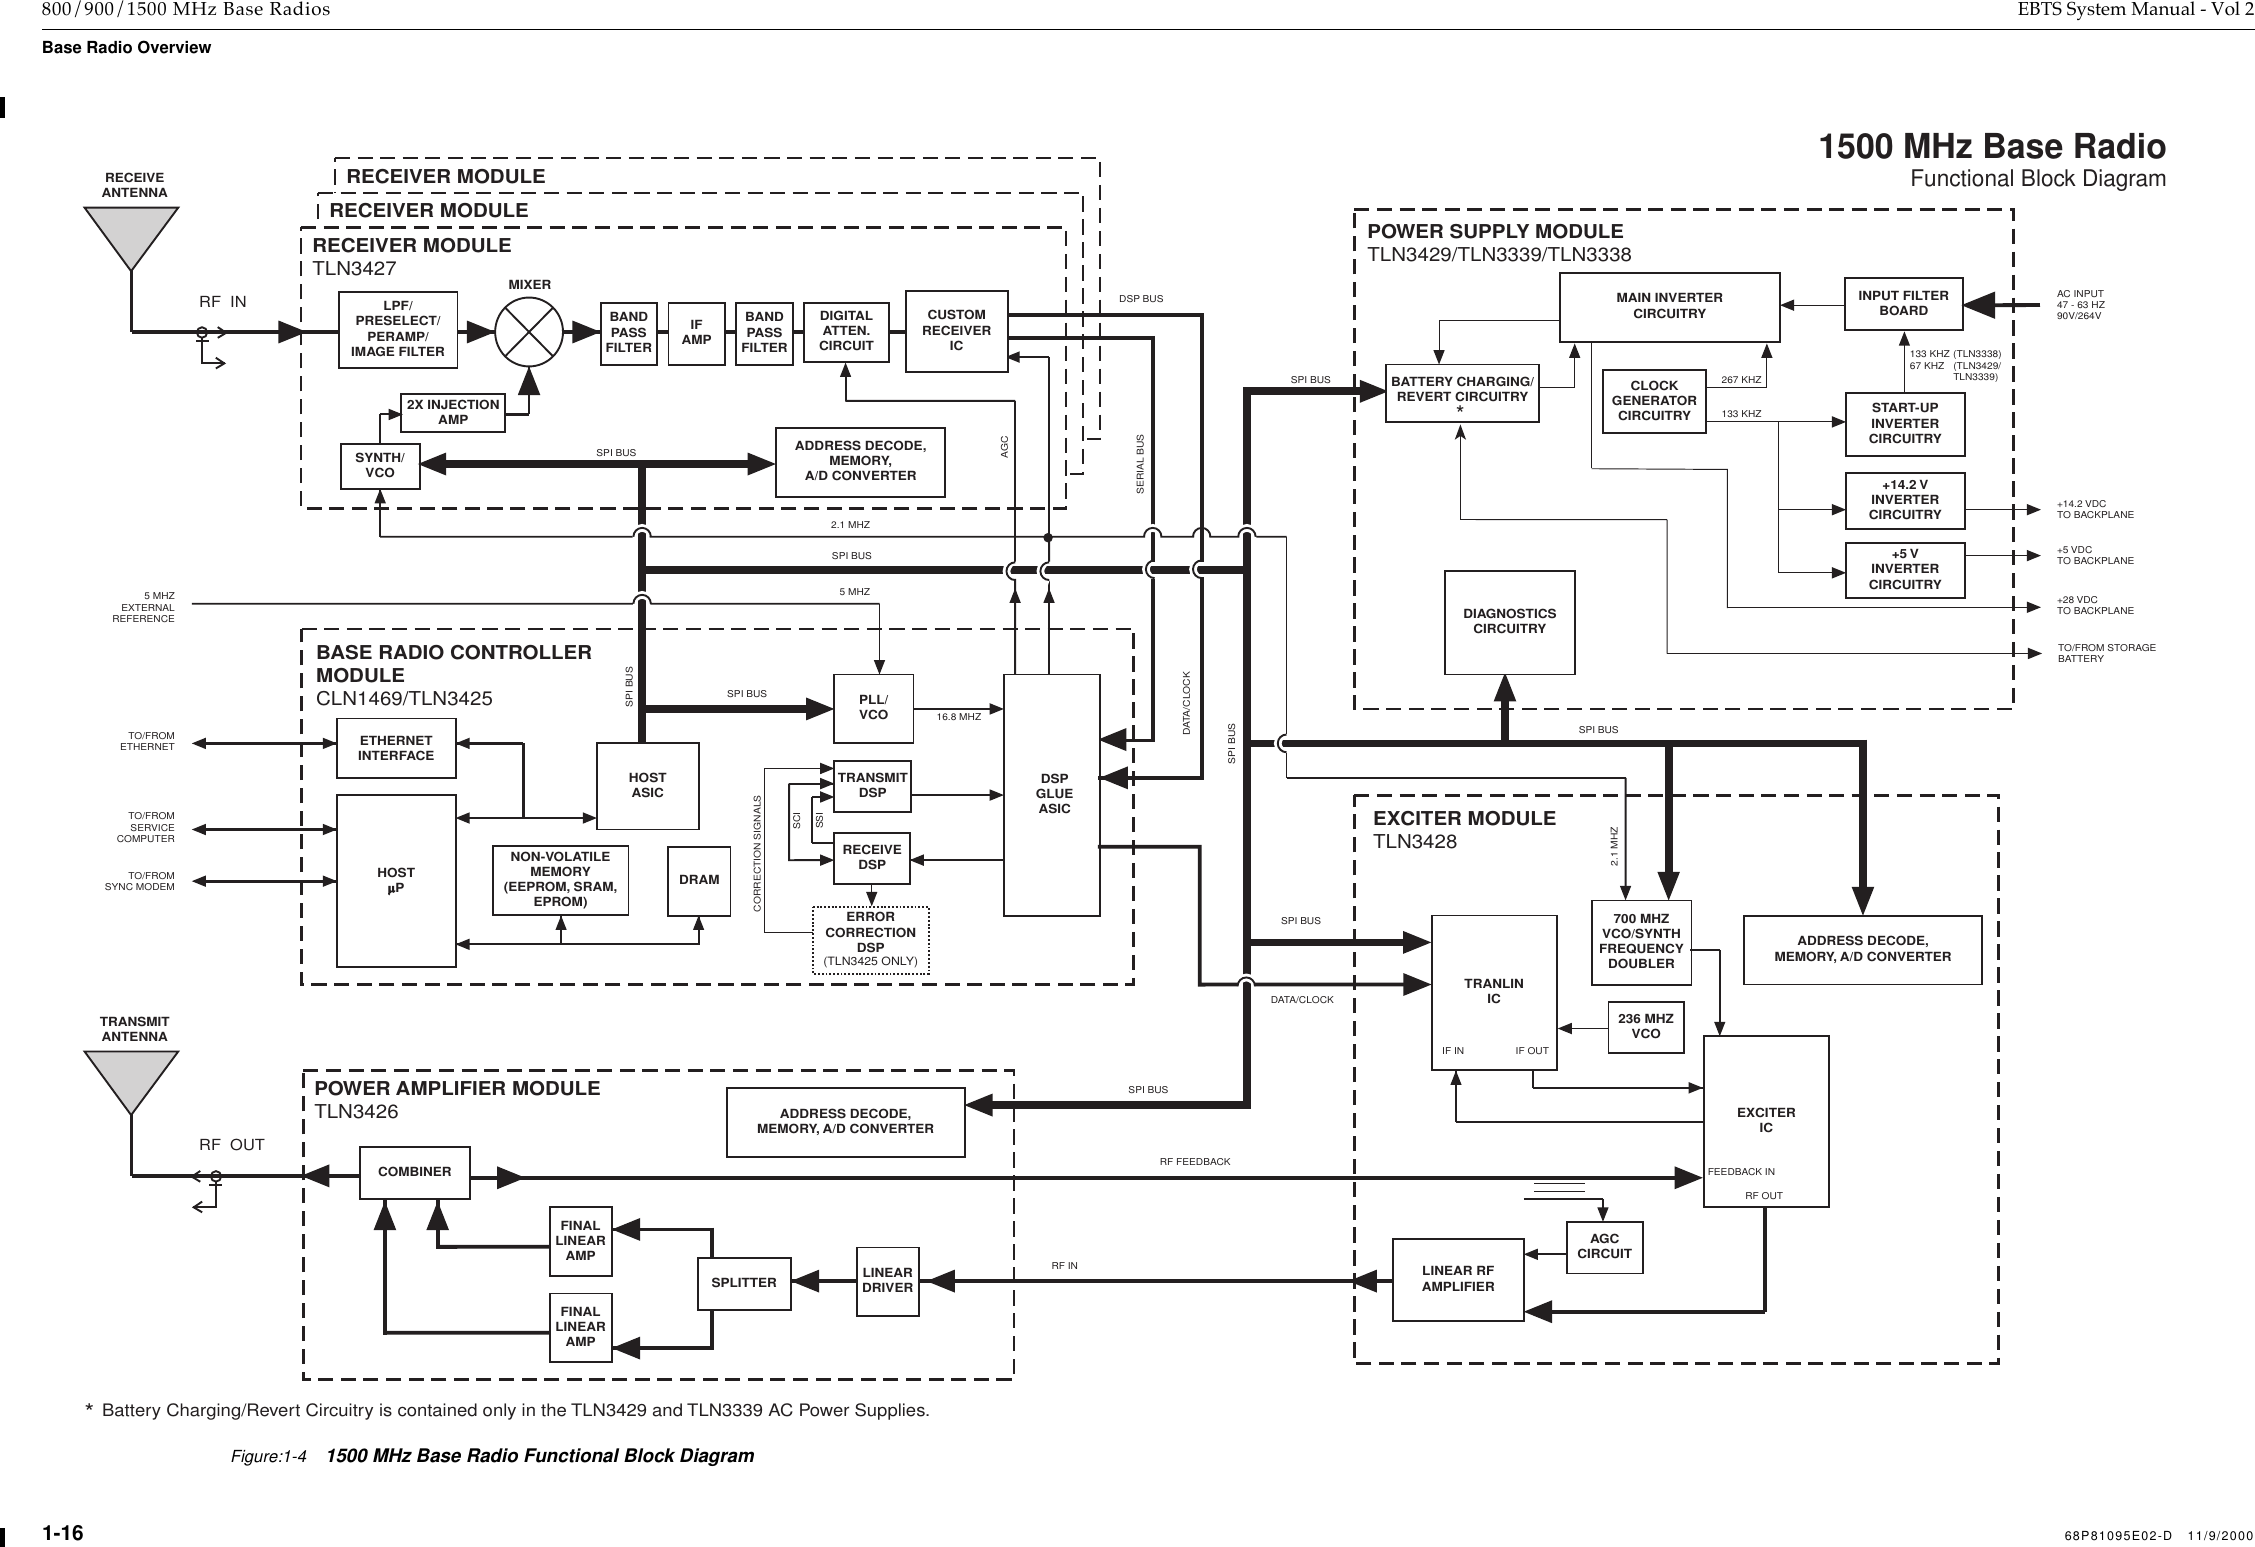  1-16 68P81095E02-D   11/9/2000 800/900/1500 MHz Base Radios EBTS System Manual - Vol 2 Base Radio Overview1500 MHz Base RadioFunctional Block DiagramPOWER AMPLIFIER MODULETLN3426TO/FROMETHERNETBASE RADIO CONTROLLERMODULECLN1469/TLN3425EXCITER MODULETLN3428POWER SUPPLY MODULETLN3429/TLN3339/TLN3338SERIAL BUSTRANSMITANTENNATO/FROMSERVICECOMPUTERTO/FROMSYNC MODEM16.8 MHZ5 MHZSPI BUS5 MHZEXTERNALREFERENCEFINALLINEARAMPFINALLINEARAMPSPLITTER LINEARDRIVERADDRESS DECODE,MEMORY, A/D CONVERTERADDRESS DECODE,MEMORY, A/D CONVERTER700 MHZVCO/SYNTHFREQUENCYDOUBLERRECEIVEANTENNARECEIVER MODULETLN3427MIXERDSP BUSLPF/PRESELECT/PERAMP/IMAGE FILTERSYNTH/VCOBANDPASSFILTERADDRESS DECODE,MEMORY,A/D CONVERTERNON-VOLATILEMEMORY(EEPROM, SRAM,EPROM)DRAMHOSTµPETHERNETINTERFACEHOSTASIC TRANSMITDSPRECEIVEDSPSCISSIPLL/VCOSPI BUS2.1 MHZCOMBINERLINEAR RFAMPLIFIERAGCCIRCUITEXCITERICIF IN IF OUTTRANLINIC236 MHZVCOMAIN INVERTERCIRCUITRYINPUT FILTERBOARDCLOCKGENERATORCIRCUITRY START-UPINVERTERCIRCUITRY133 KHZ267 KHZ+14.2 VINVERTERCIRCUITRY+5 VINVERTERCIRCUITRY133 KHZ (TLN3338)67 KHZ  (TLN3429/TLN3339)DIAGNOSTICSCIRCUITRY+14.2 VDCTO BACKPLANE+5 VDCTO BACKPLANE+28 VDCTO BACKPLANETO/FROM STORAGEBATTERYAC INPUT47 - 63 HZ90V/264VRF OUTSPI BUSSPI BUSSPI BUSSPI BUS2.1 MHZSPI BUSDATA/CLOCKSPI BUSDATA/CLOCKRF  INRF  OUTRF FEEDBACK FEEDBACK INERRORCORRECTIONDSP(TLN3425 ONLY)CORRECTION SIGNALS2X INJECTIONAMPDIGITALATTEN.CIRCUITRECEIVER MODULERECEIVER MODULEAGCSPI BUSIFAMPBANDPASSFILTERRF INDSPGLUEASICCUSTOMRECEIVERICBattery Charging/Revert Circuitry is contained only in the TLN3429 and TLN3339 AC Power Supplies.*BATTERY CHARGING/REVERT CIRCUITRY*Figure:1-41500 MHz Base Radio Functional Block Diagram